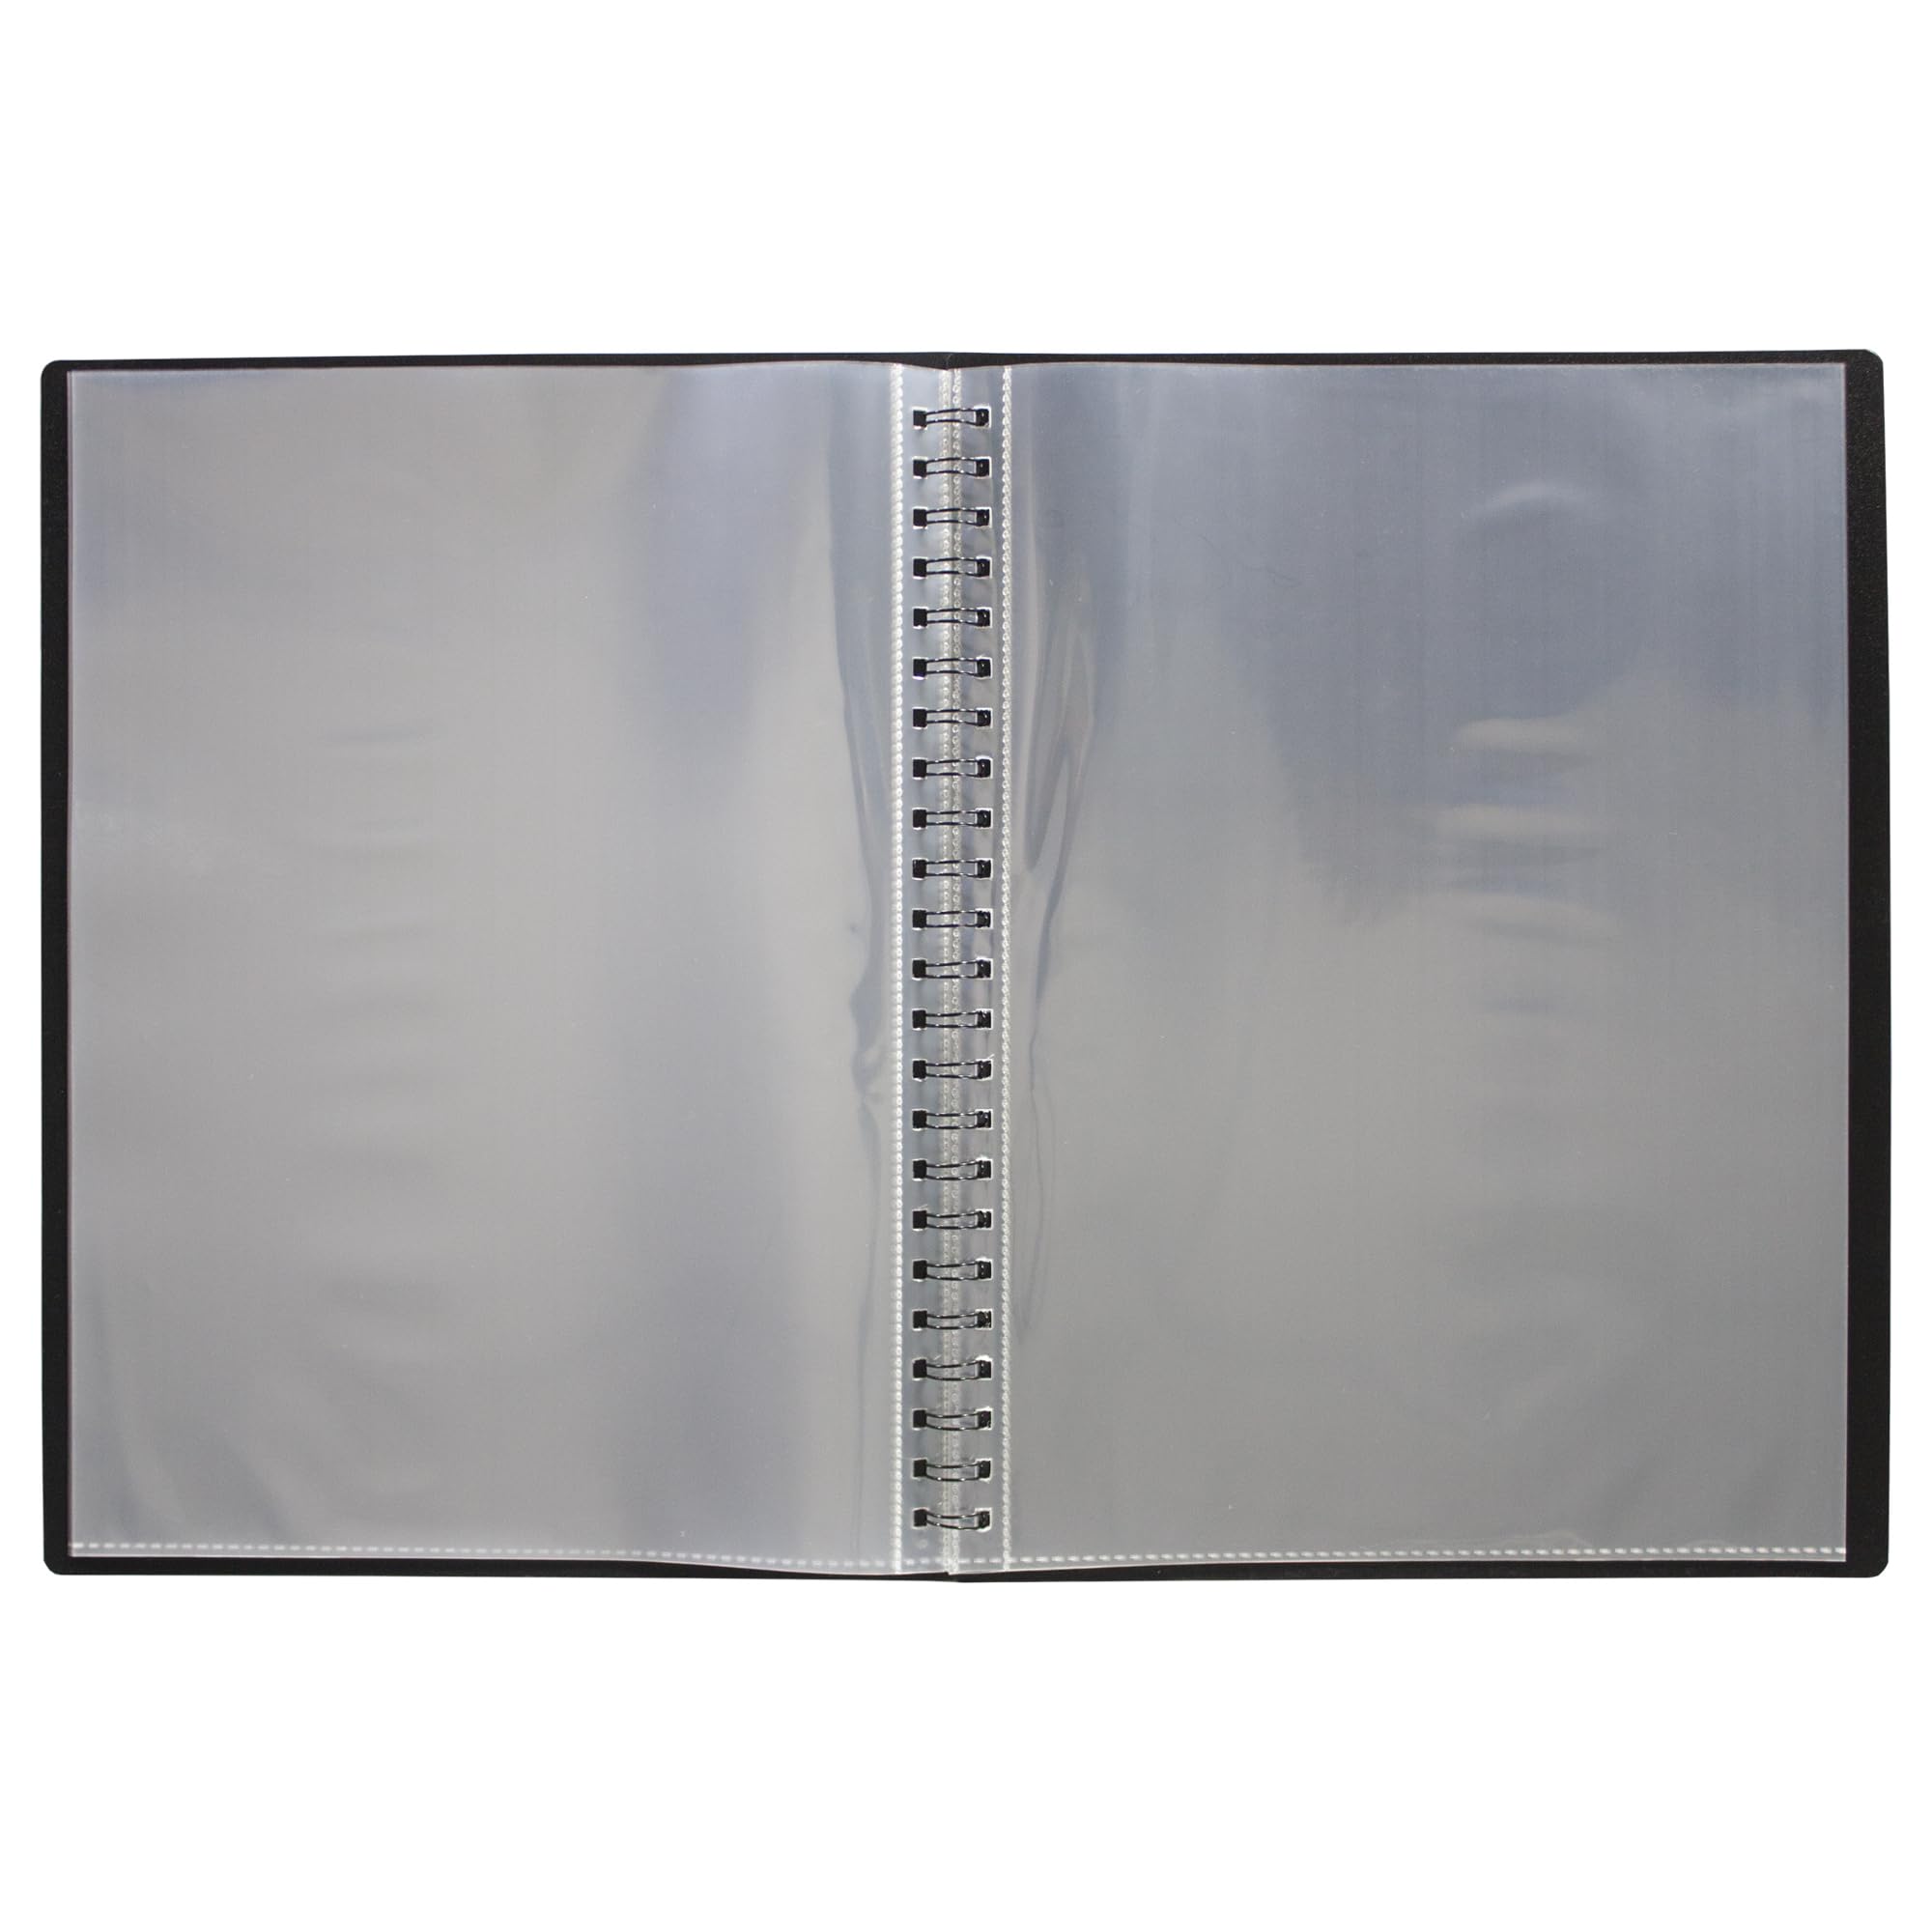 eco-eco A5 50% Recycled 60 Pocket Fold Flat Spiral Bound Display Book, eco138